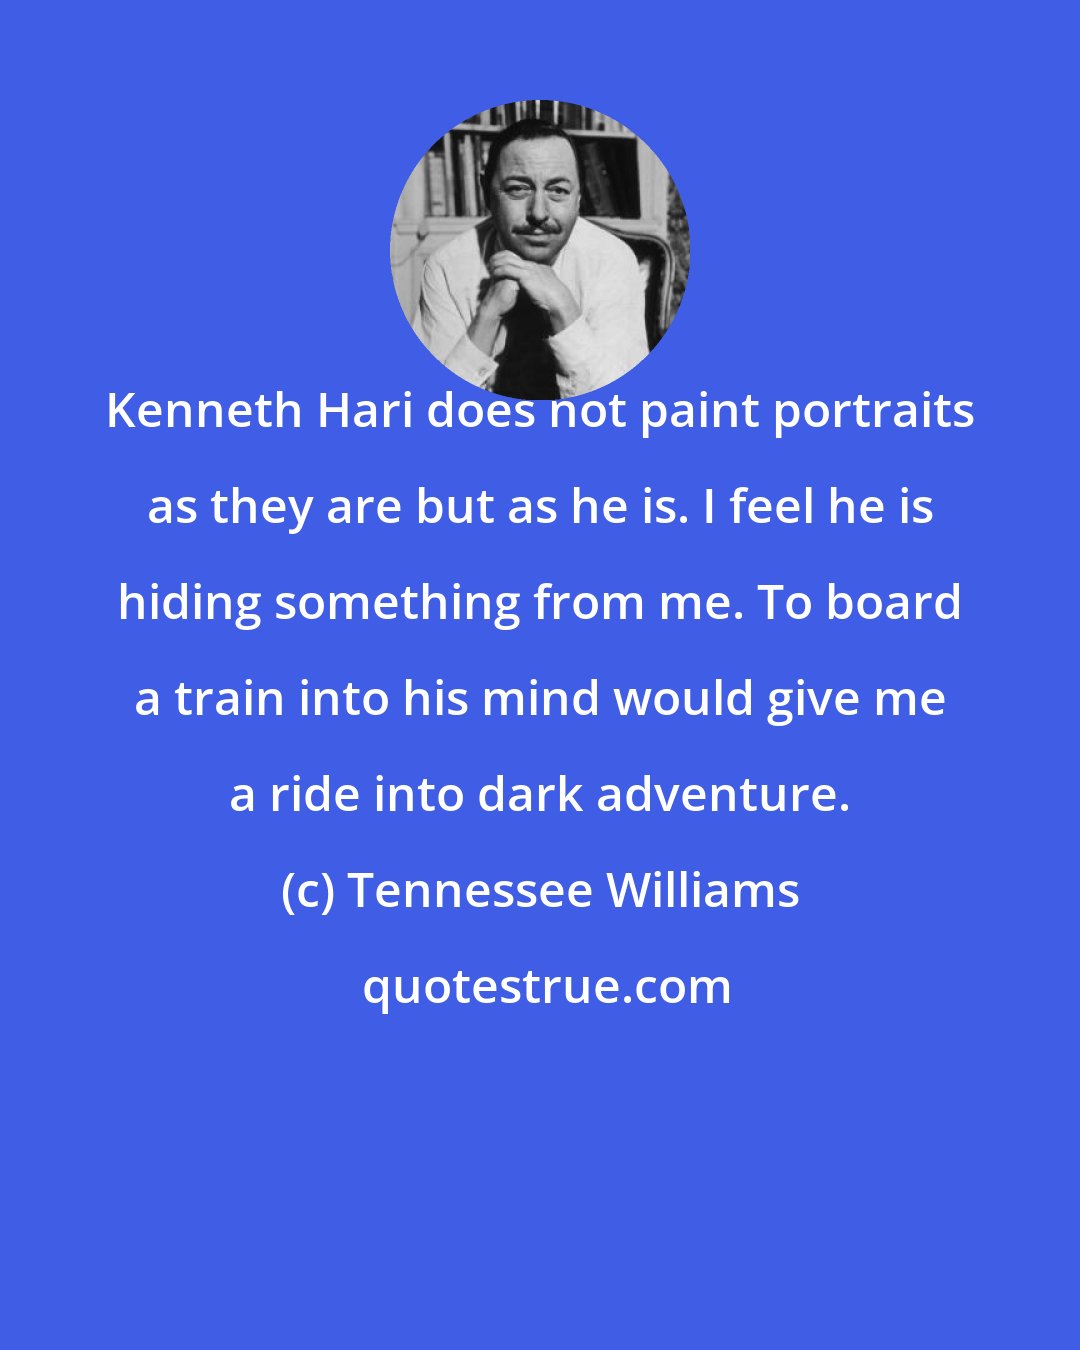 Tennessee Williams: Kenneth Hari does not paint portraits as they are but as he is. I feel he is hiding something from me. To board a train into his mind would give me a ride into dark adventure.